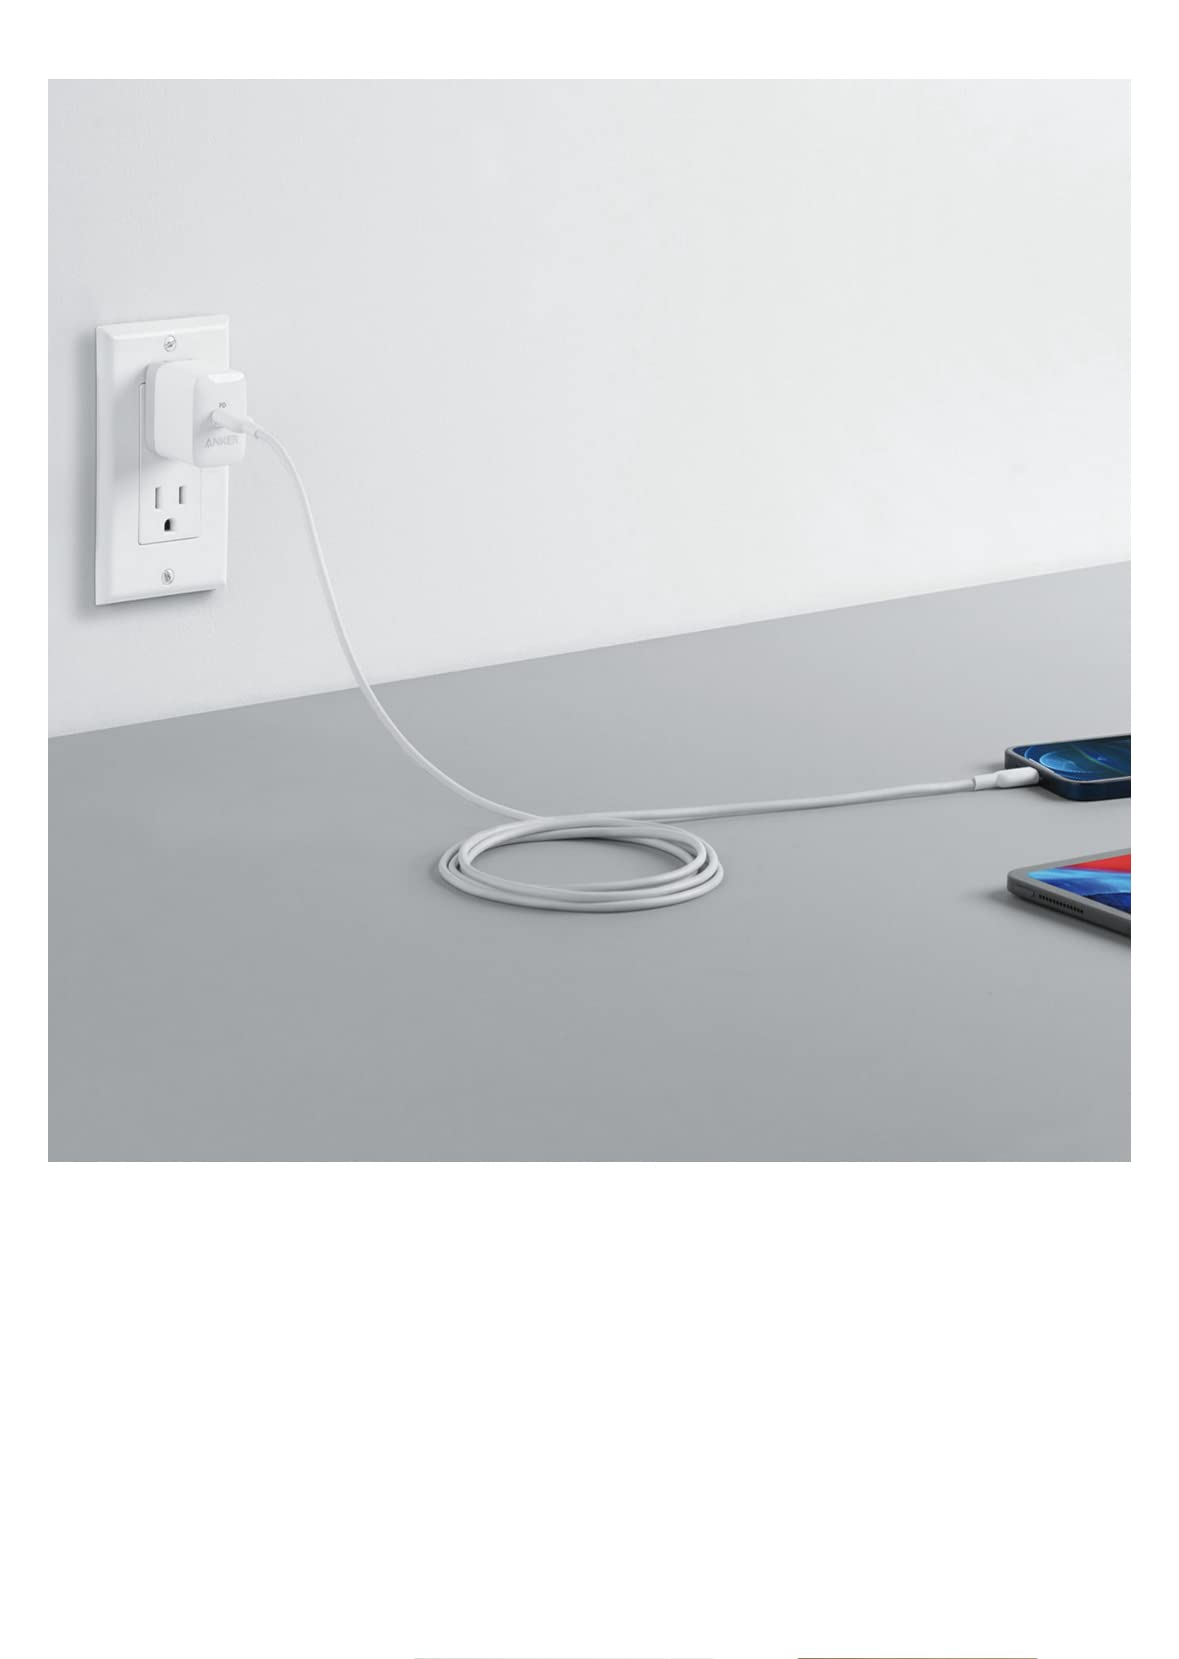 Anker PowerPort III 20W USB-C Power Delivery Wall Charger - White